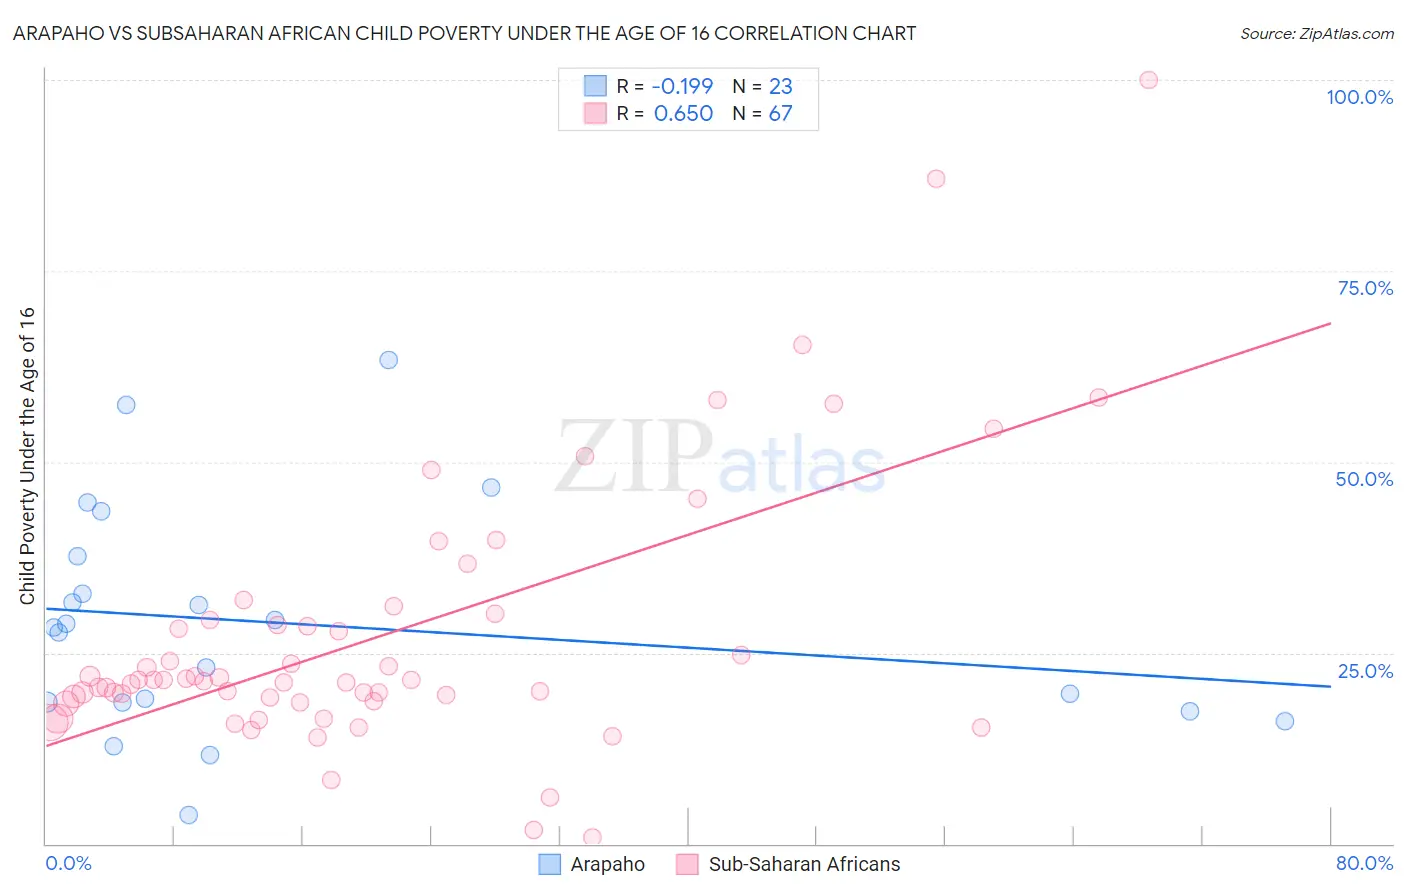 Arapaho vs Subsaharan African Child Poverty Under the Age of 16